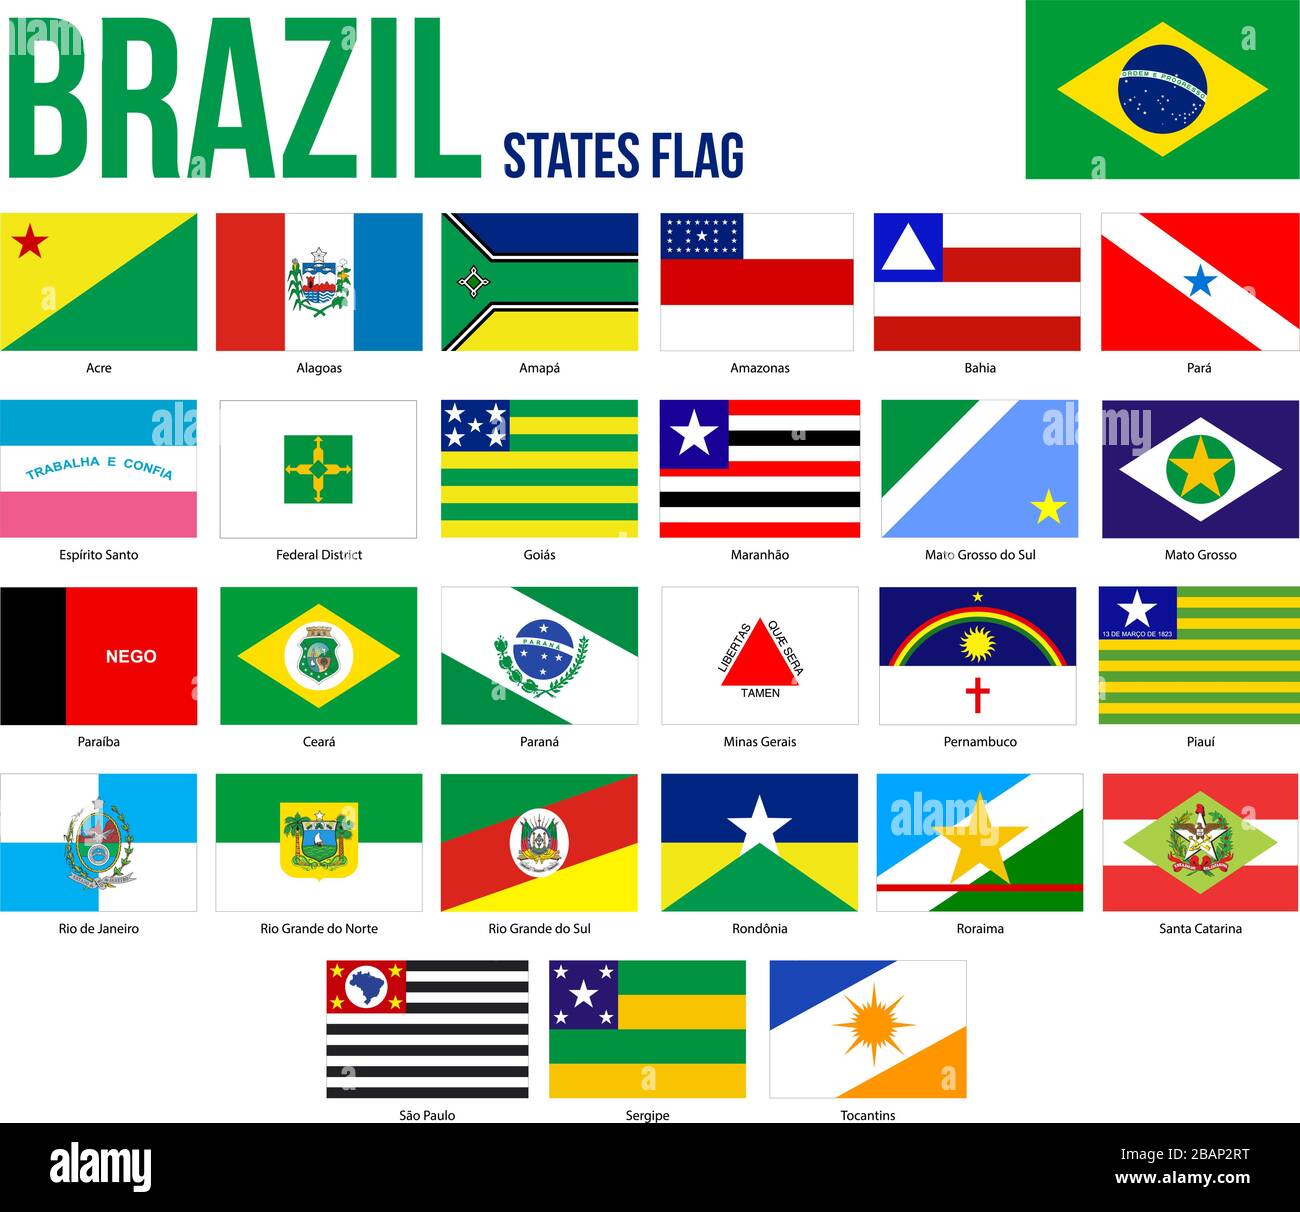 Brazil All States Flags Vector Illustration in Official Colors And Proportion. Brazil States Flag Collection. Stock Vector